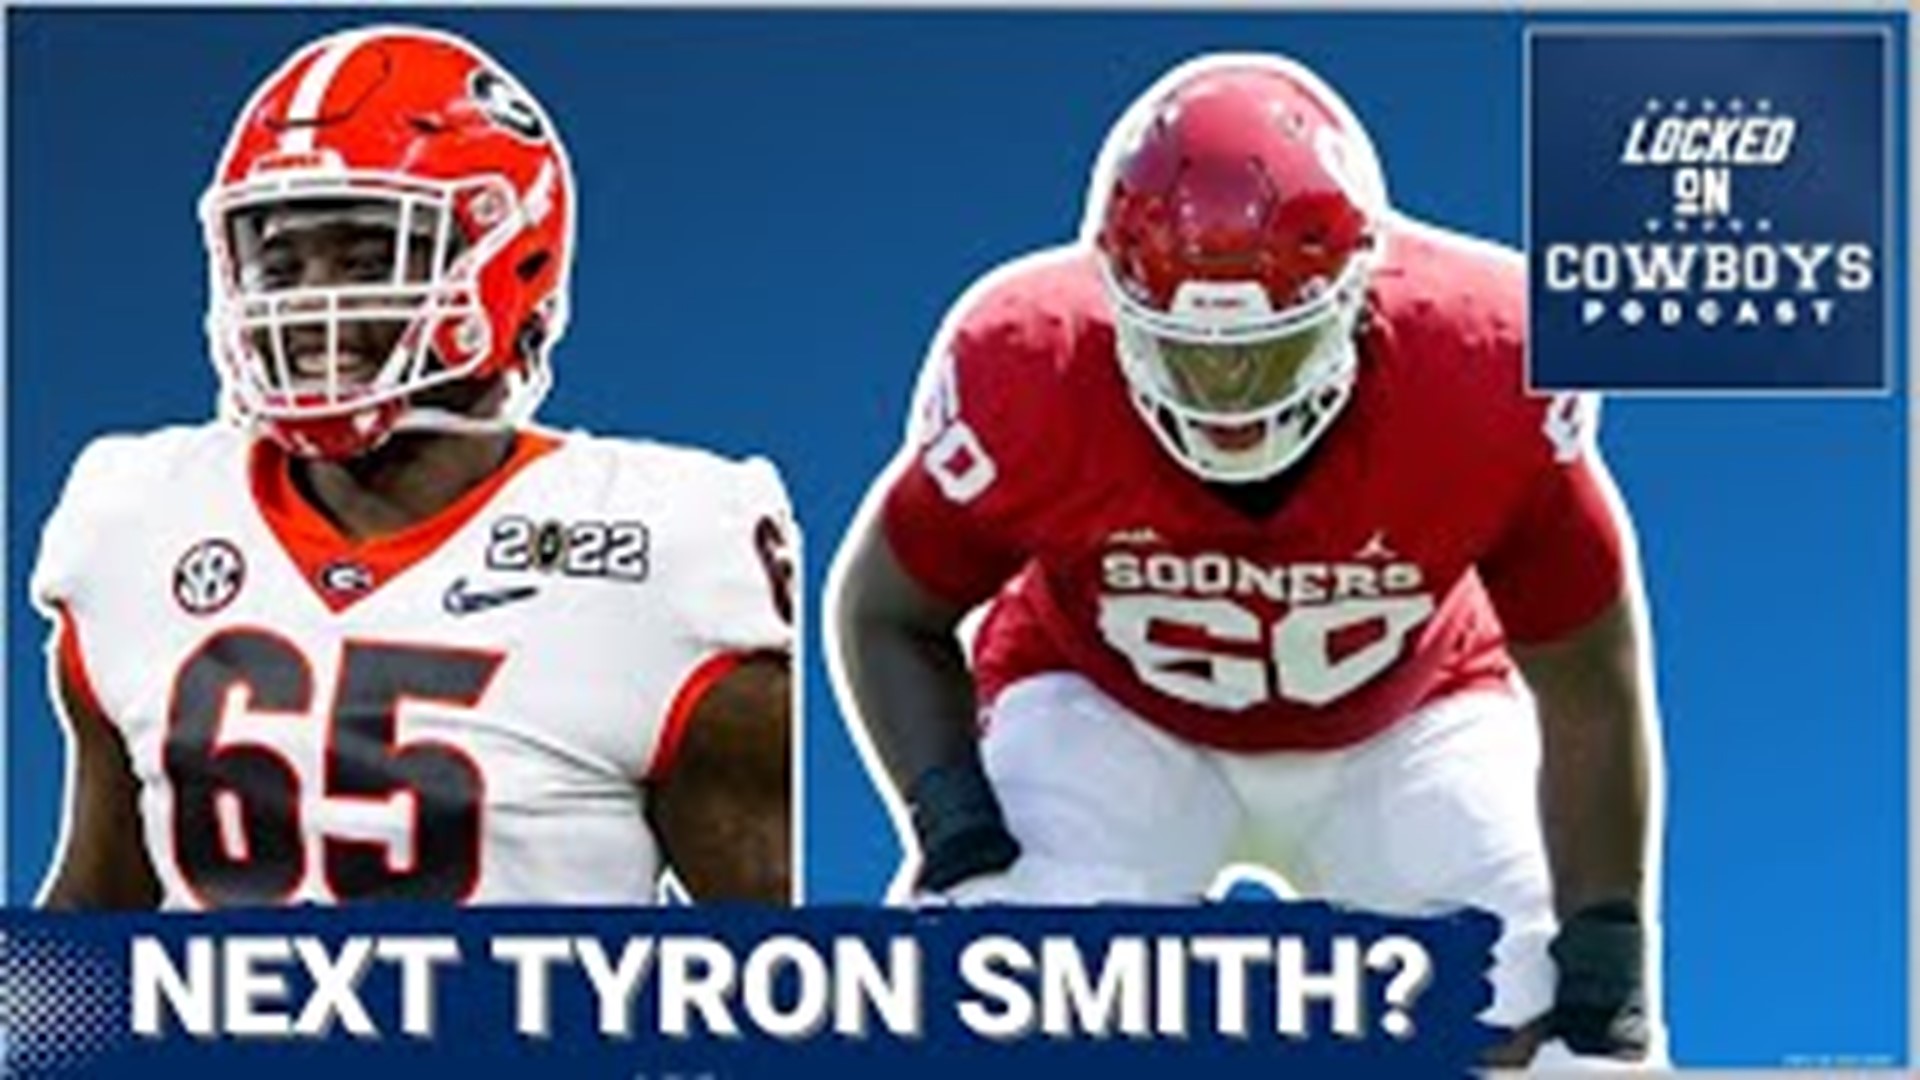 Can The Dallas Cowboys Find The Next Tyron Smith?